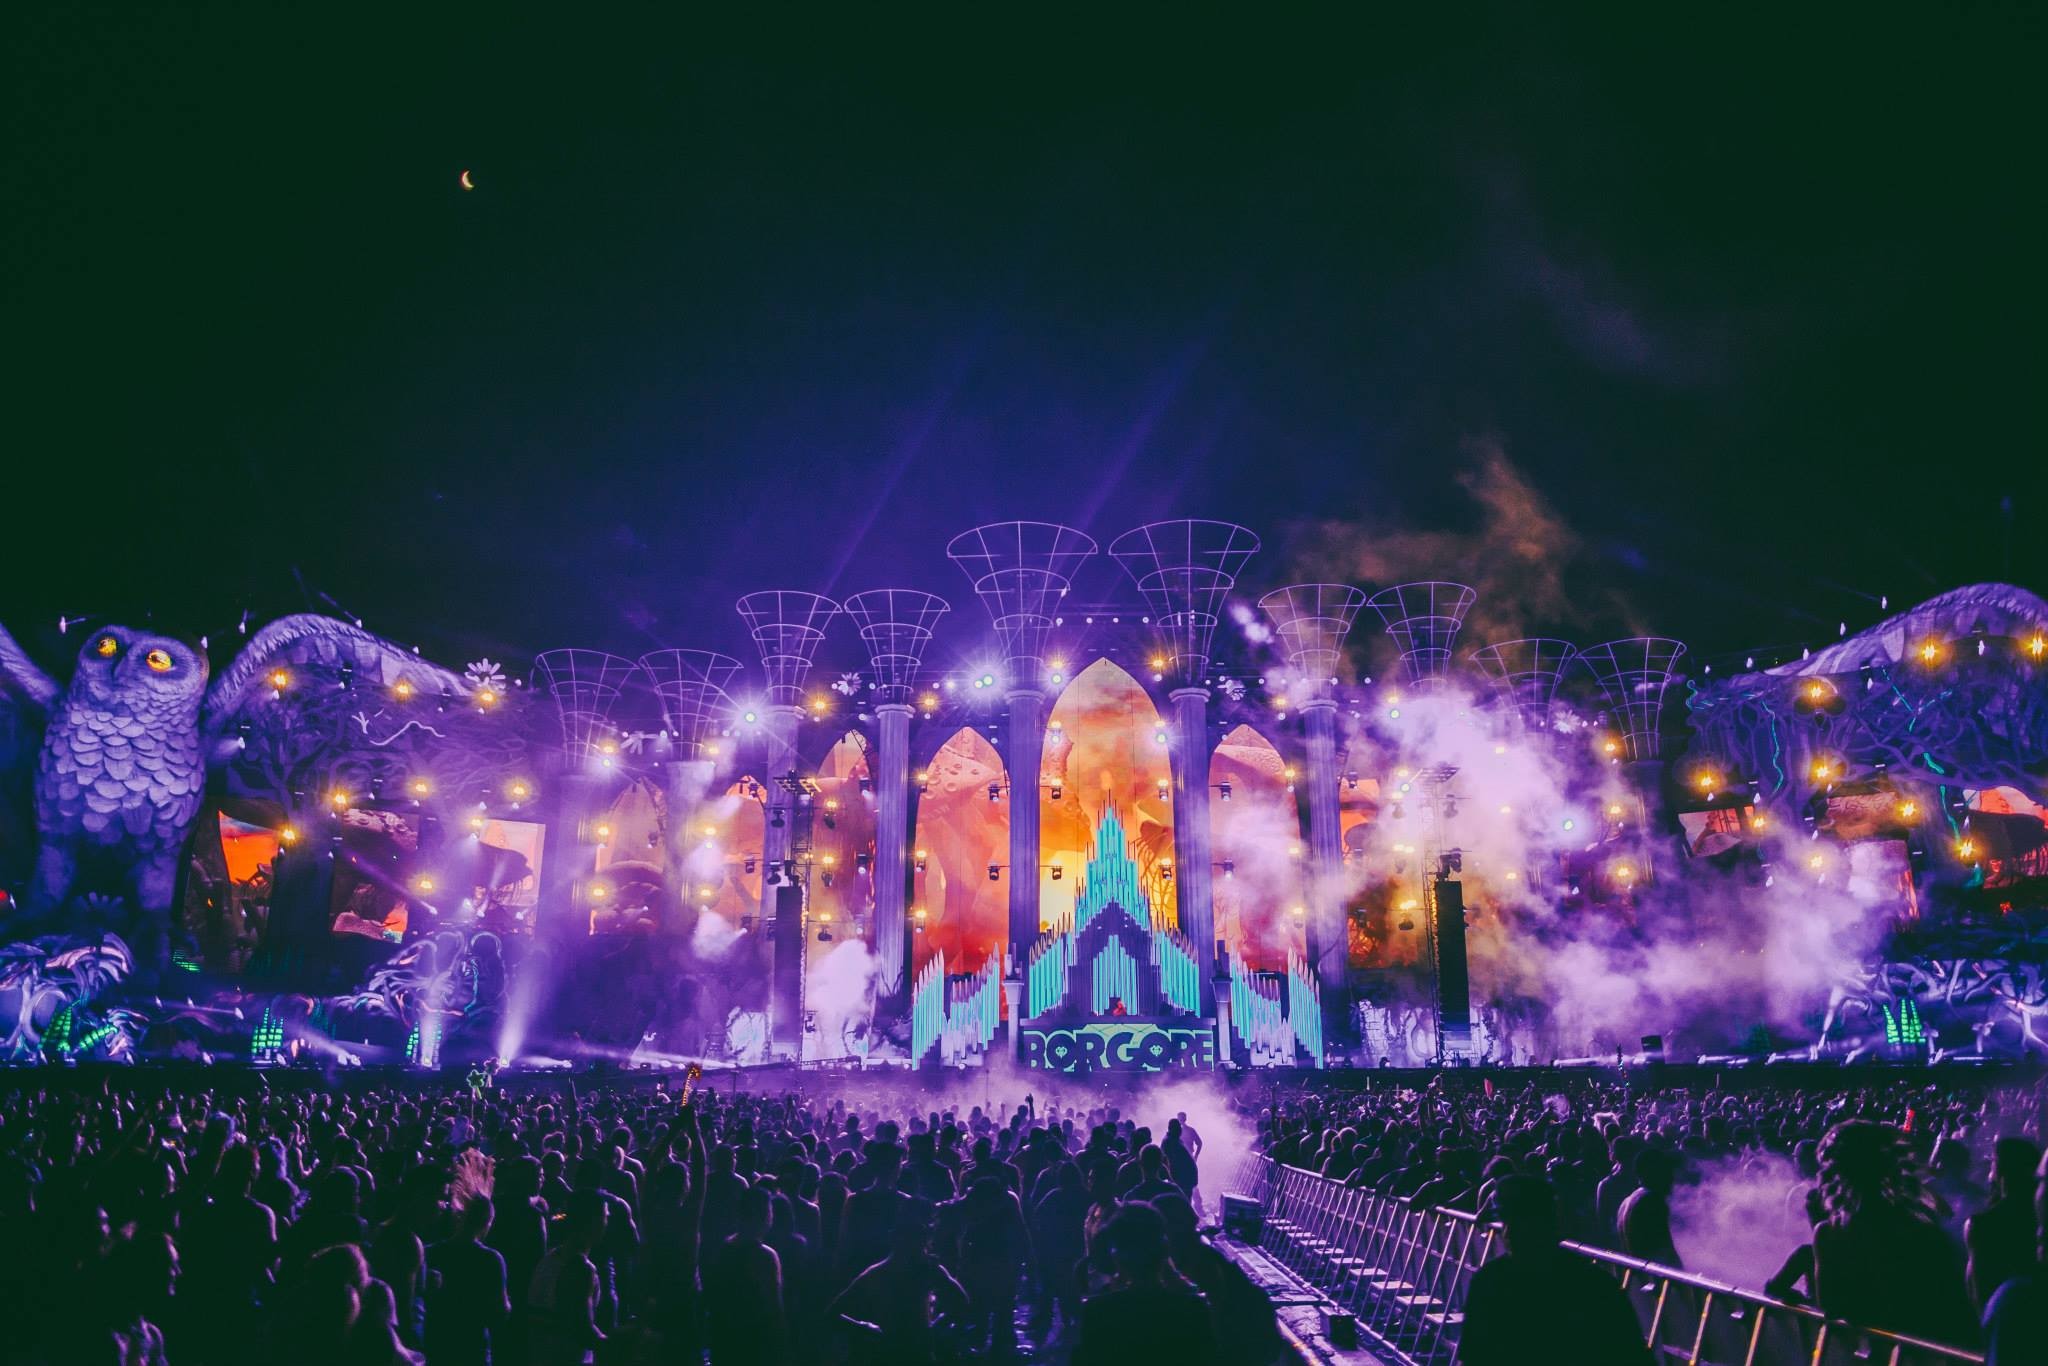 2048x1366 kineticCATHEDRAL Stage to Hit the Ground at EDC New York